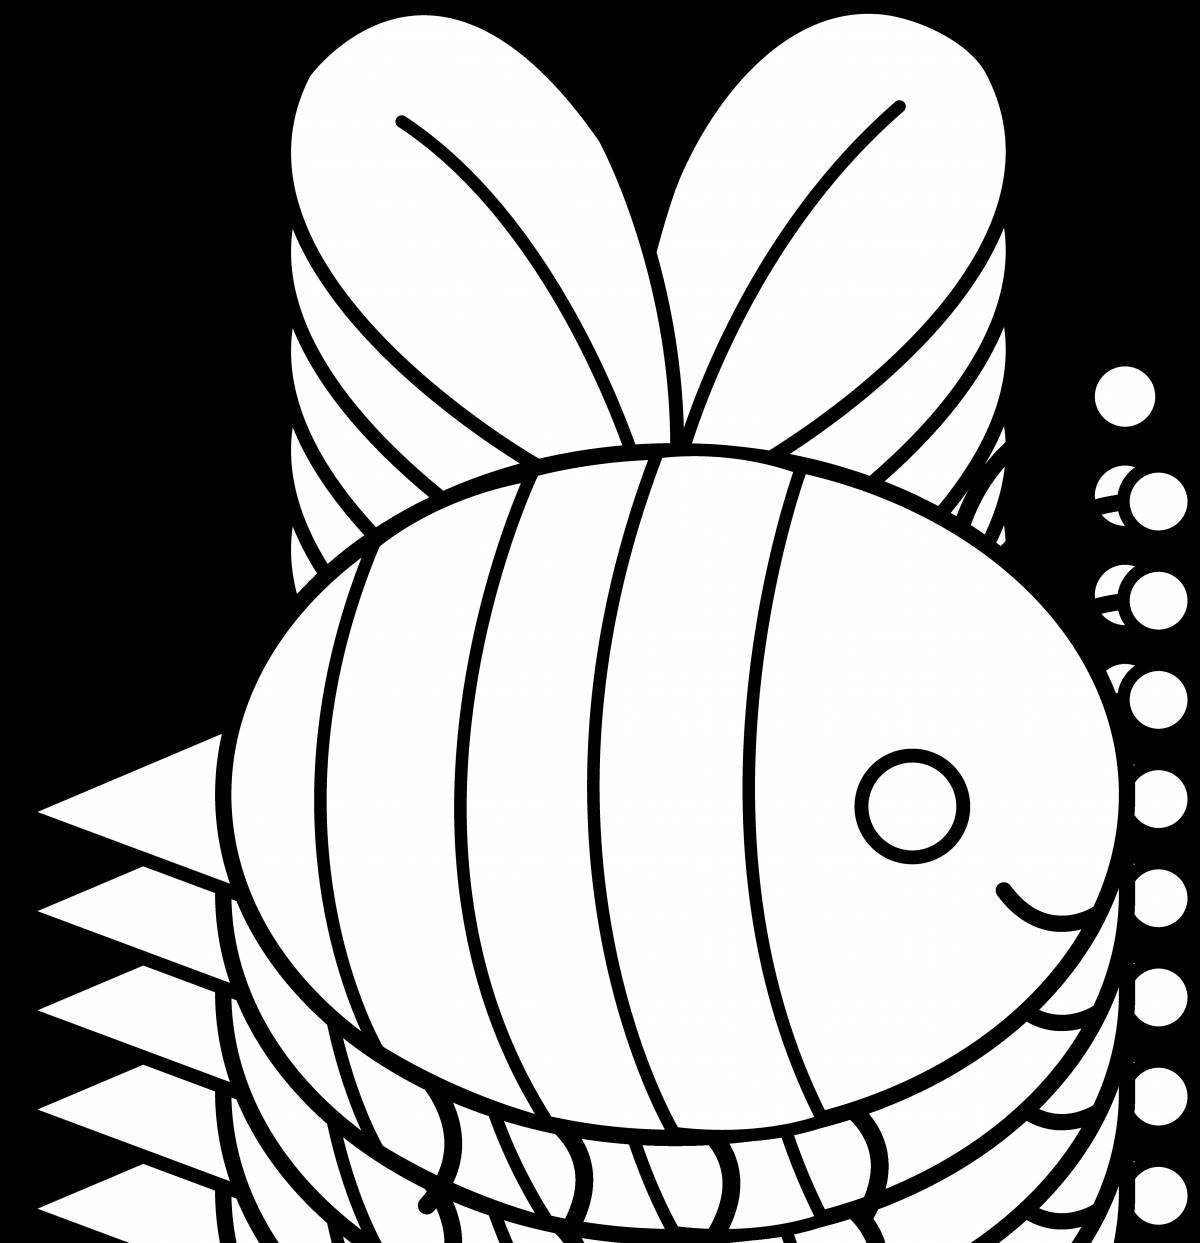 Awesome bee coloring page for kids